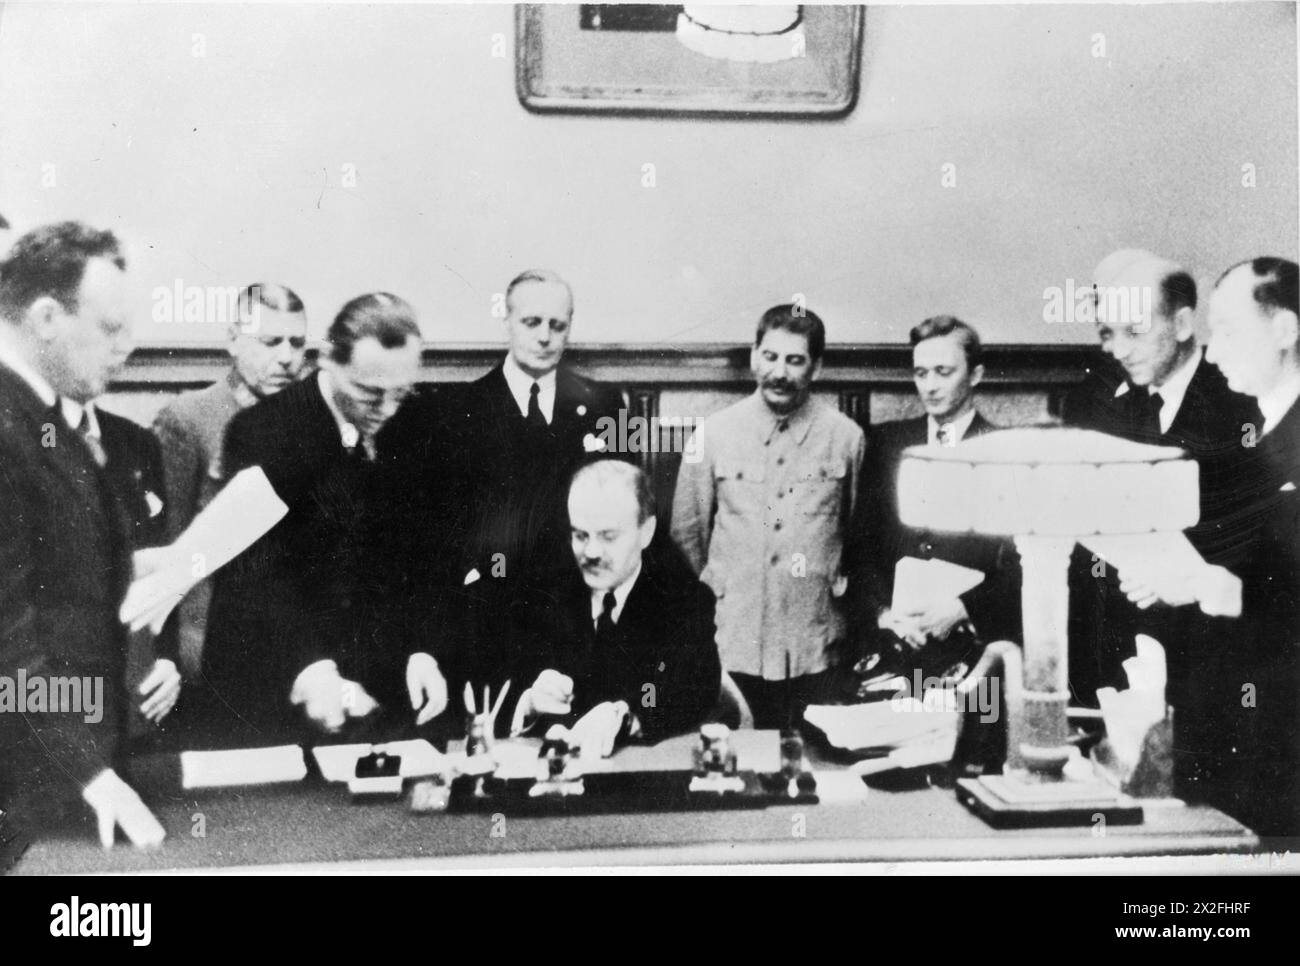 THE NAZI-SOVIET NON-AGGRESSION PACT (THE RIBBENTROP-MOLOTOV PACT) - The Soviet Minister for Foreign Affairs, Vyacheslav Molotov, signs the Nazi-Soviet Non-Aggression Pact (also known as the Molotov-Ribbentrop Pact) in the presence of the German Foreign Minister, Joachim von Ribbentrop and the Soviet leader Josef Stalin (both standing immediately behind), in Moscow, 28 September 1939 Molotov, Vyacheslav Mikhailovich, Stalin, Joseph, Ribbentrop, Joachim von, Shaposhnikov, Boris Mikhailovitch Stock Photo